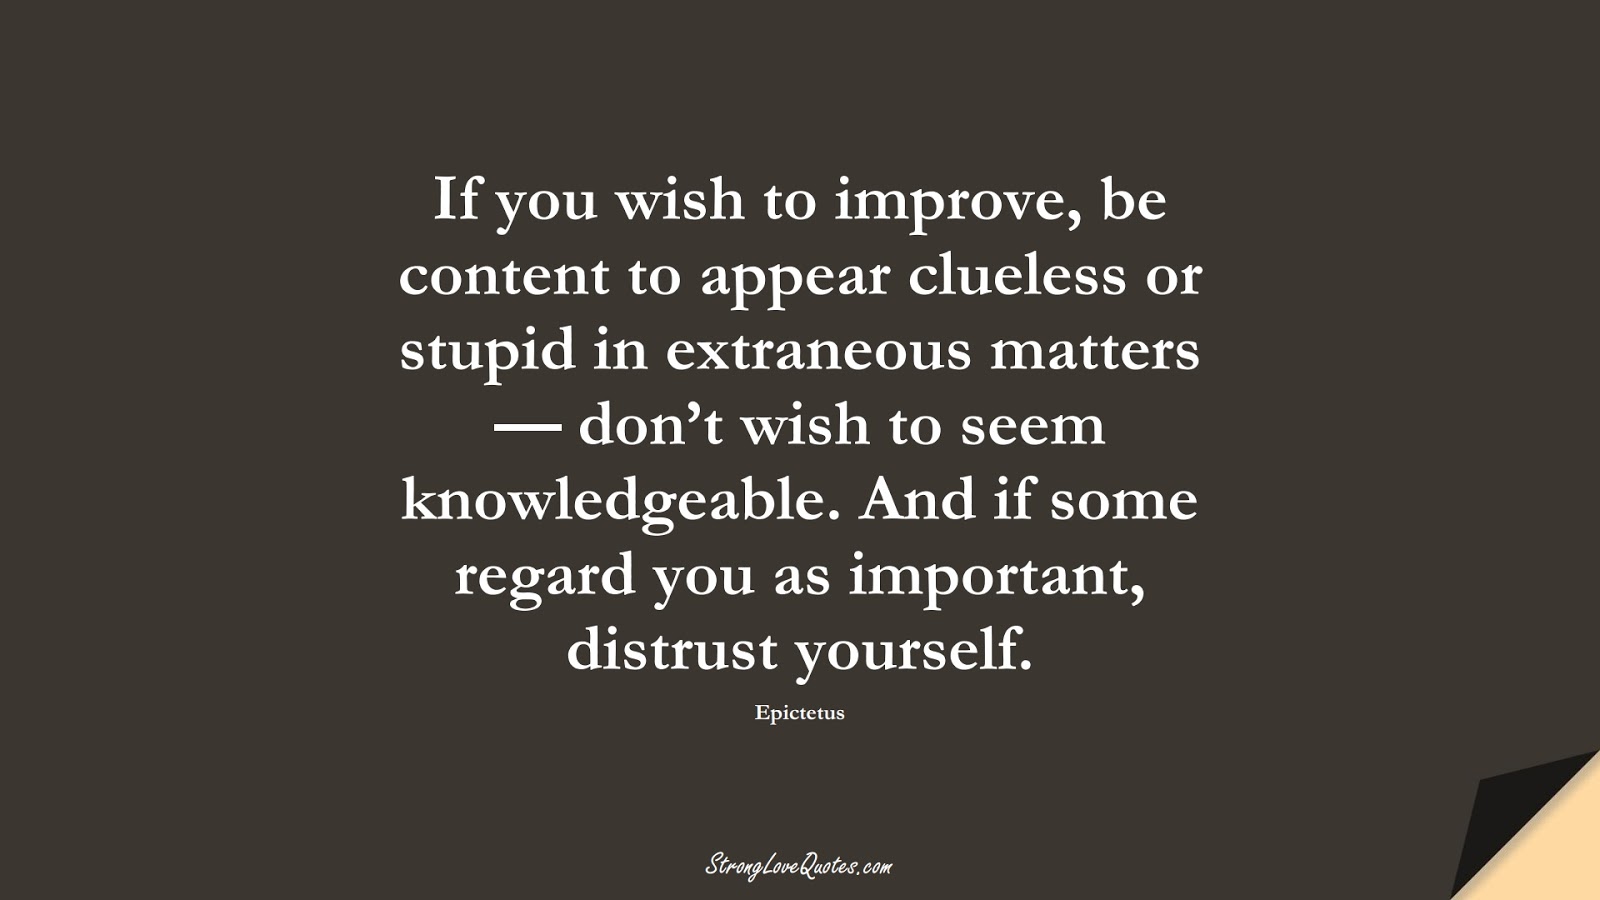 If you wish to improve, be content to appear clueless or stupid in extraneous matters — don’t wish to seem knowledgeable. And if some regard you as important, distrust yourself. (Epictetus);  #LearningQuotes